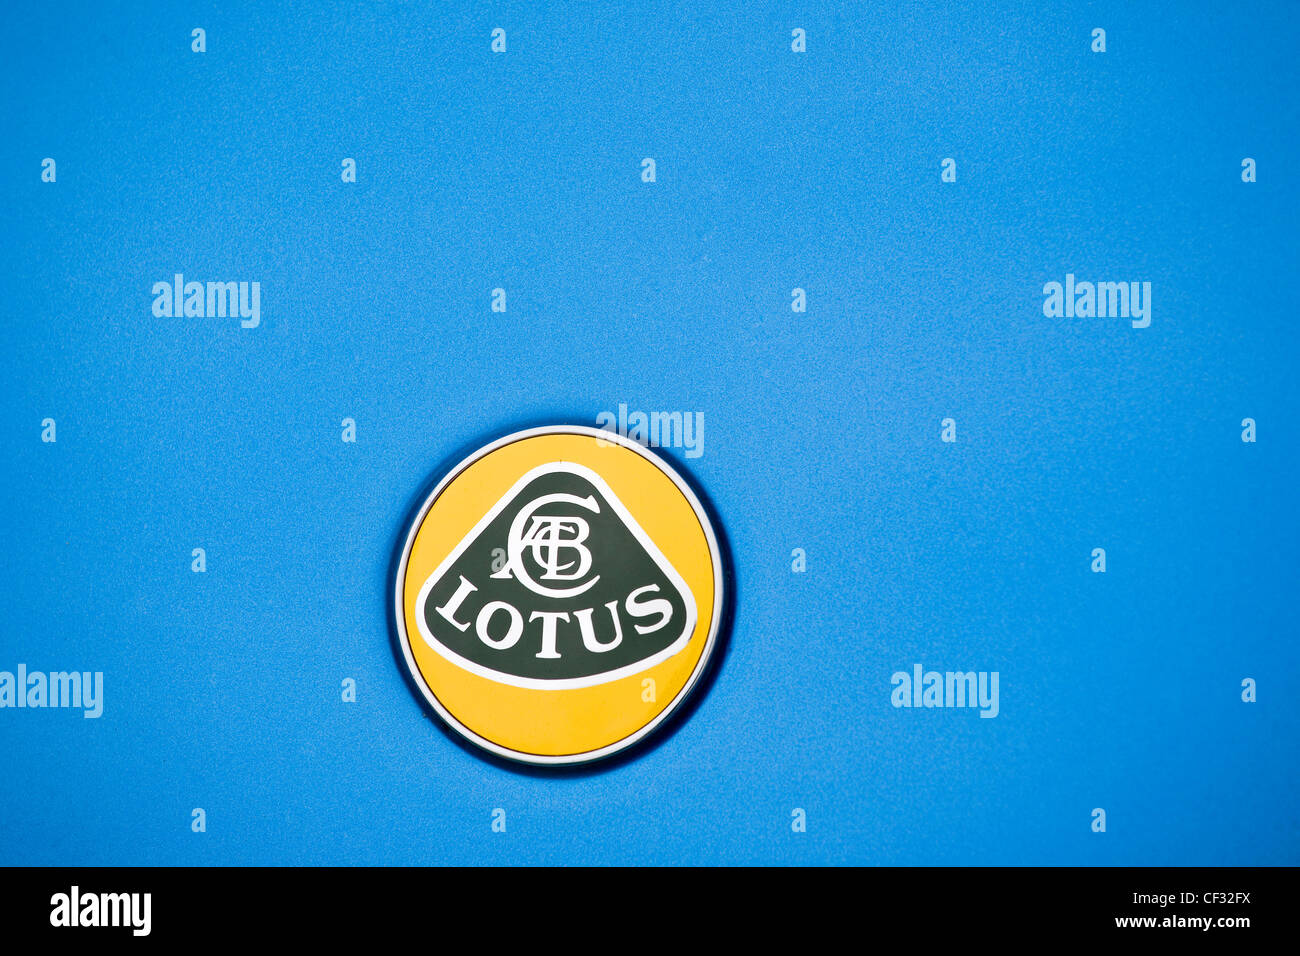 A Lotus car badge, a presitigious brand in the world of sports cars. Stock Photo